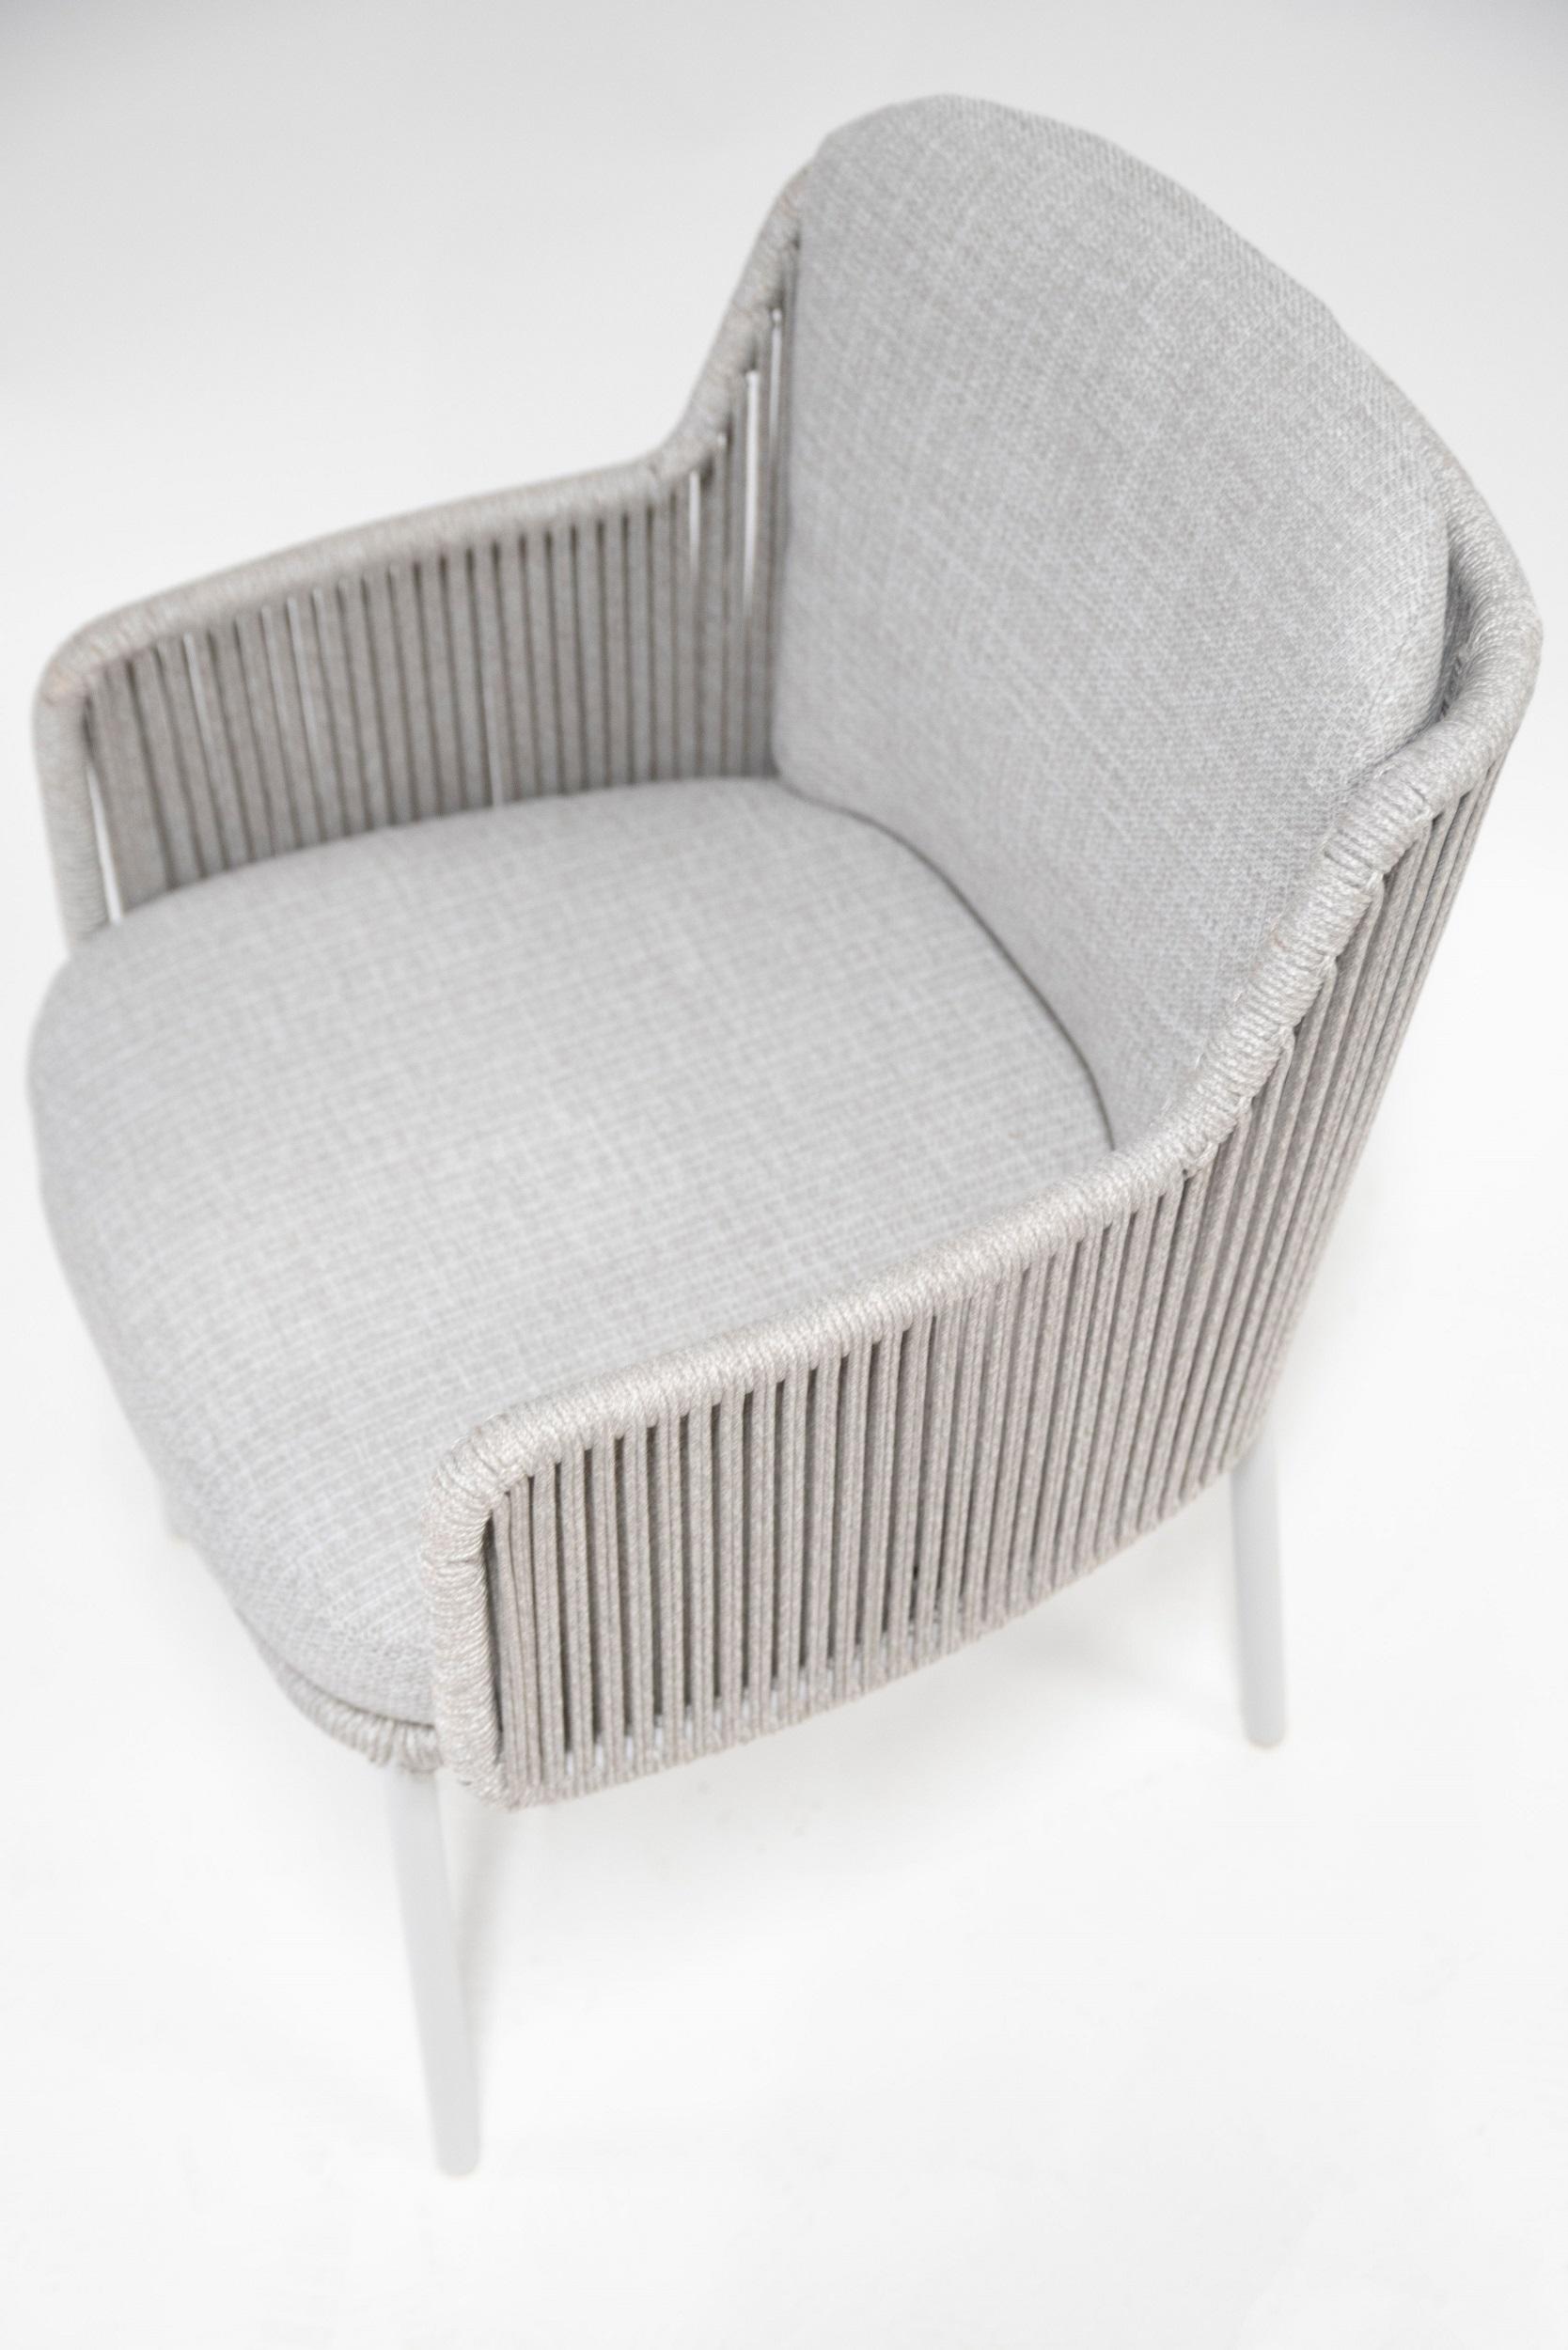 aerial view of light grey modern patio garden dining chair in rope weave